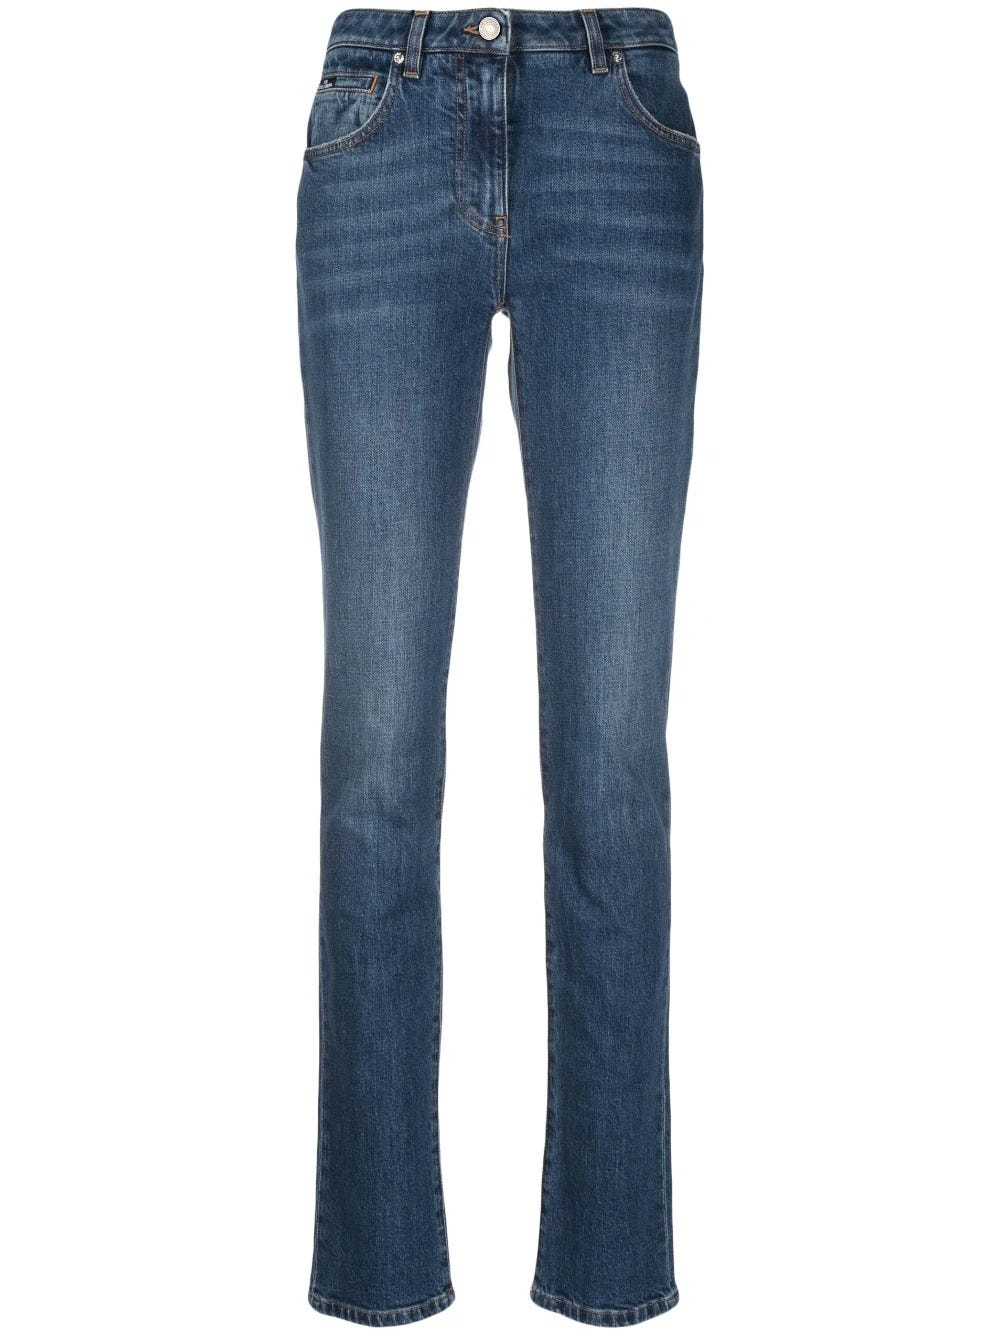 DOLCE & GABBANA BLUE SKINNY JEANS WITH A LIGHTENED EFFECT